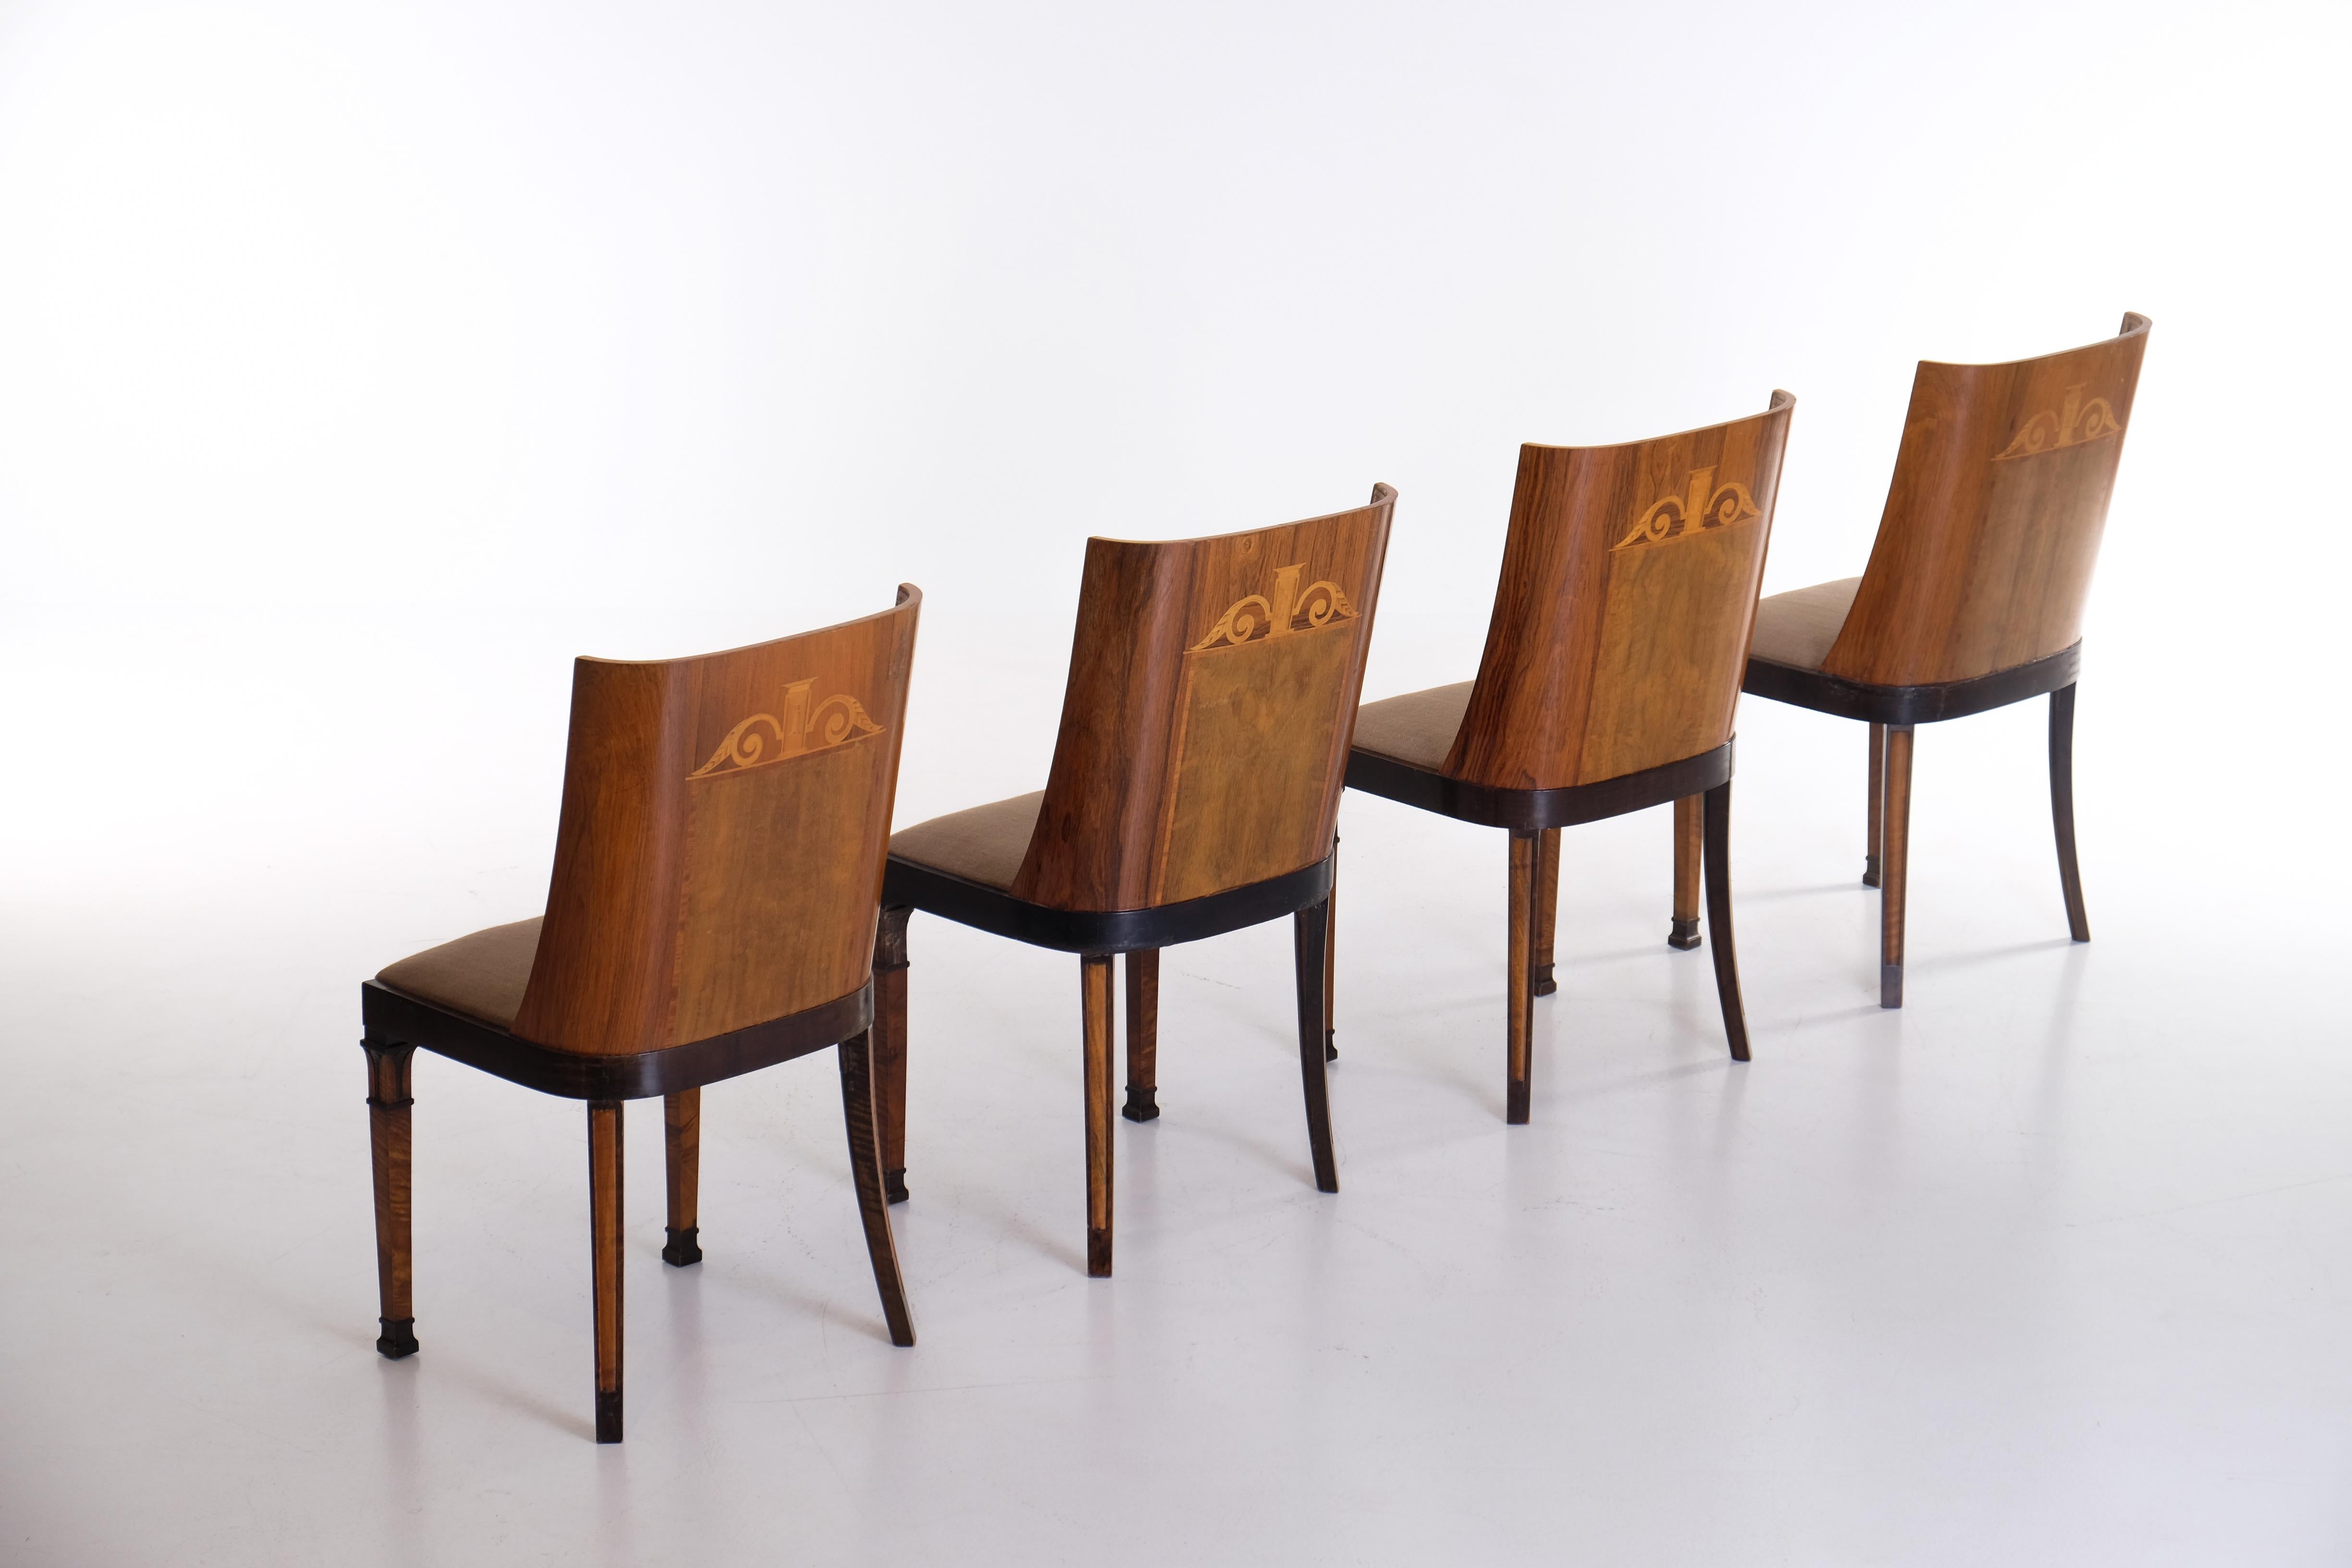 Scandinavian Modern Set of 4 Chairs Attributed to Carl Bergsten, Sweden, 1920s For Sale